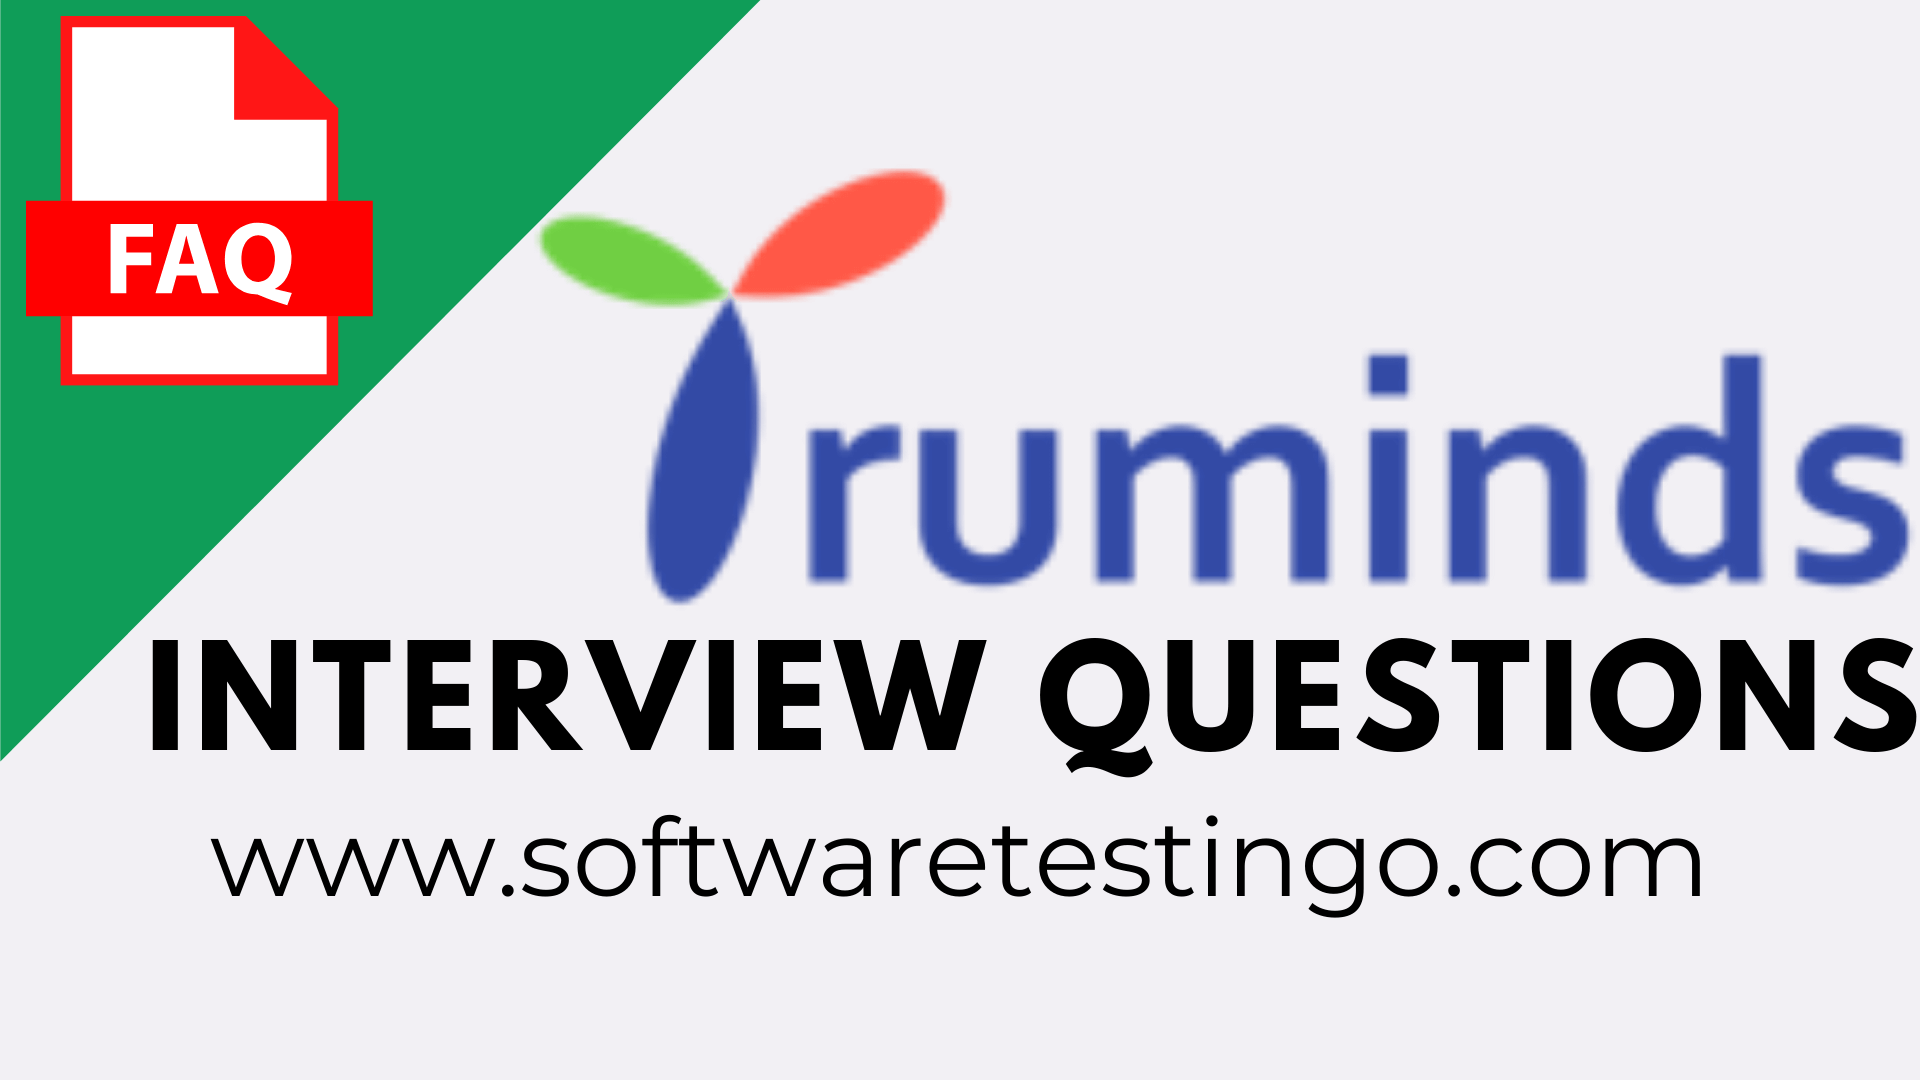 TruMinds Interview Questions